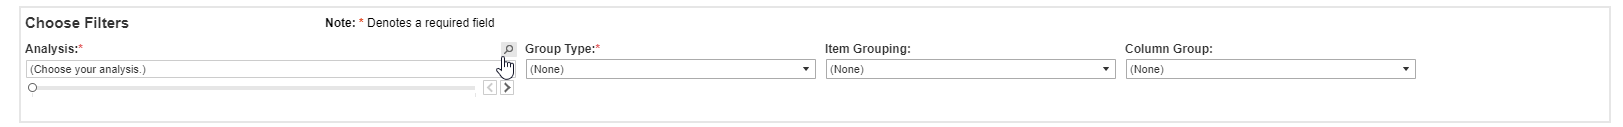 Item Summary by Item Group - Choose Filter options